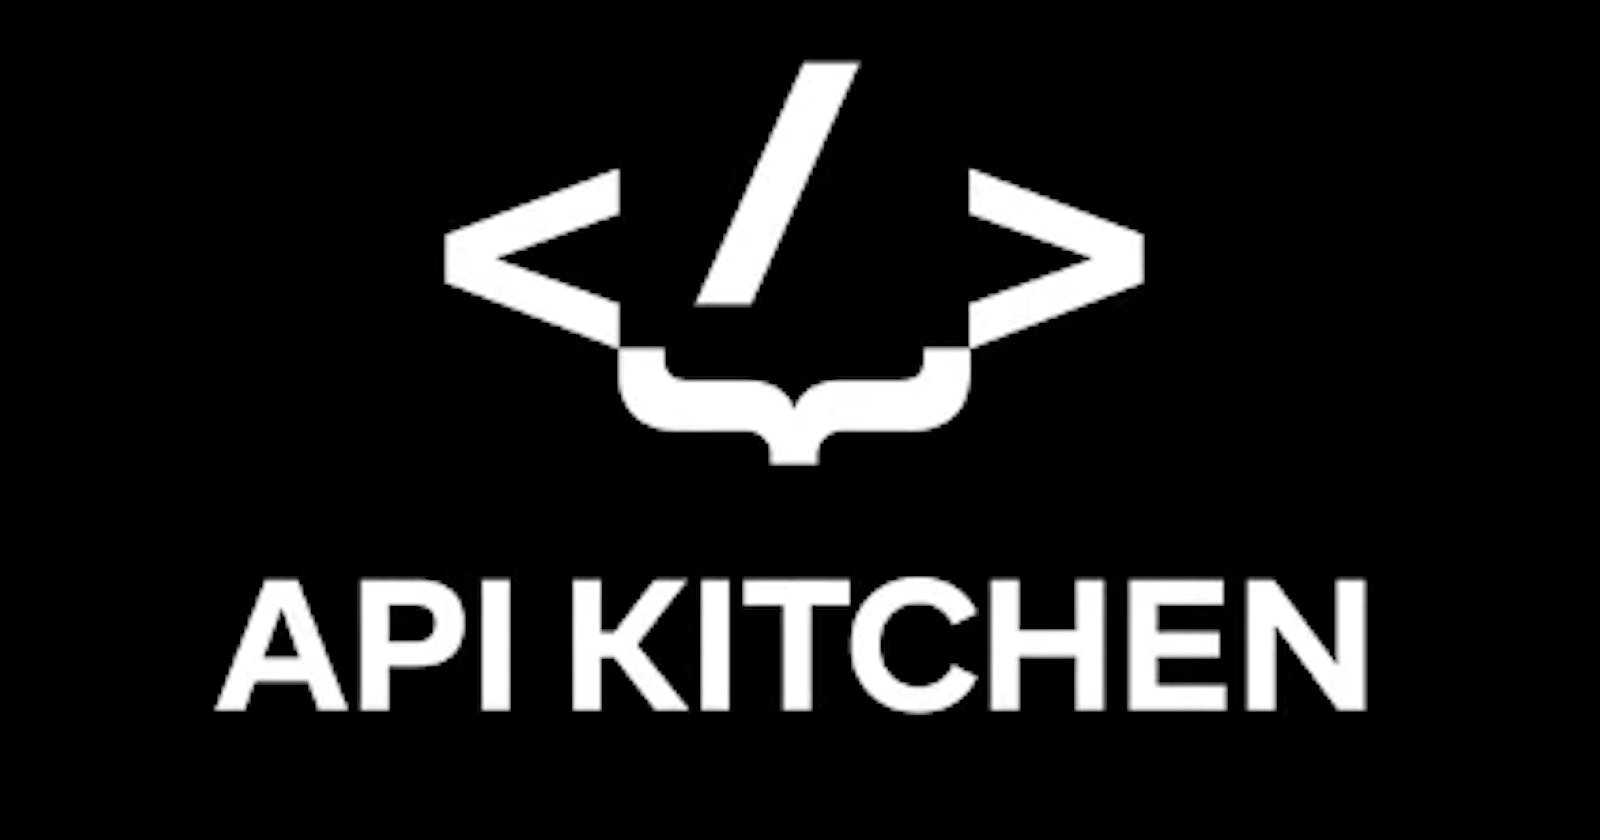 API kitchen: The recipe for API testing and hacking using OWASP top 10.